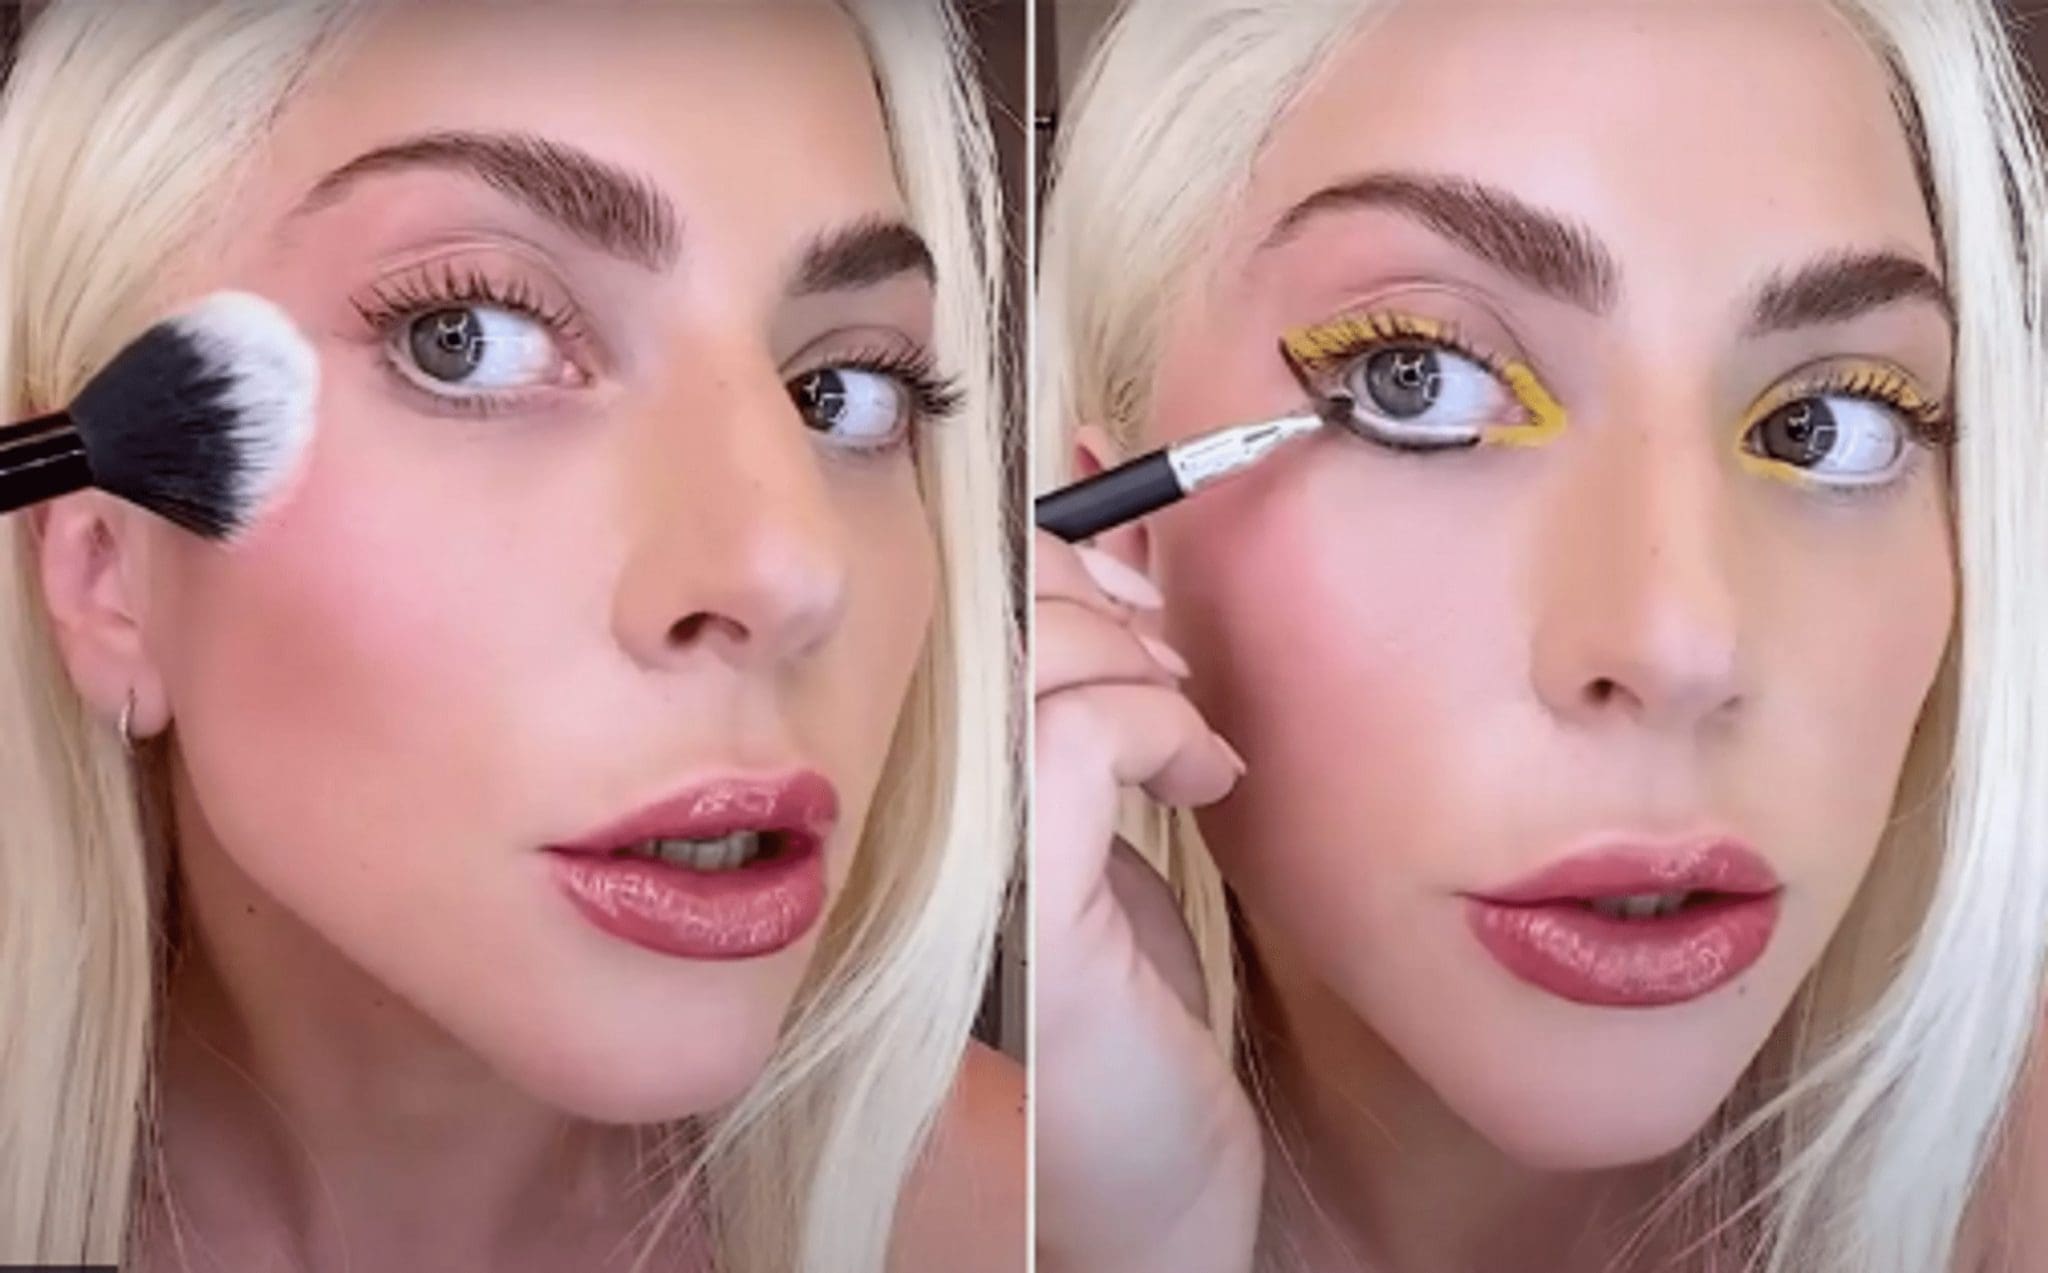 Lady Gaga filmed a beauty video and showed how to do her makeup